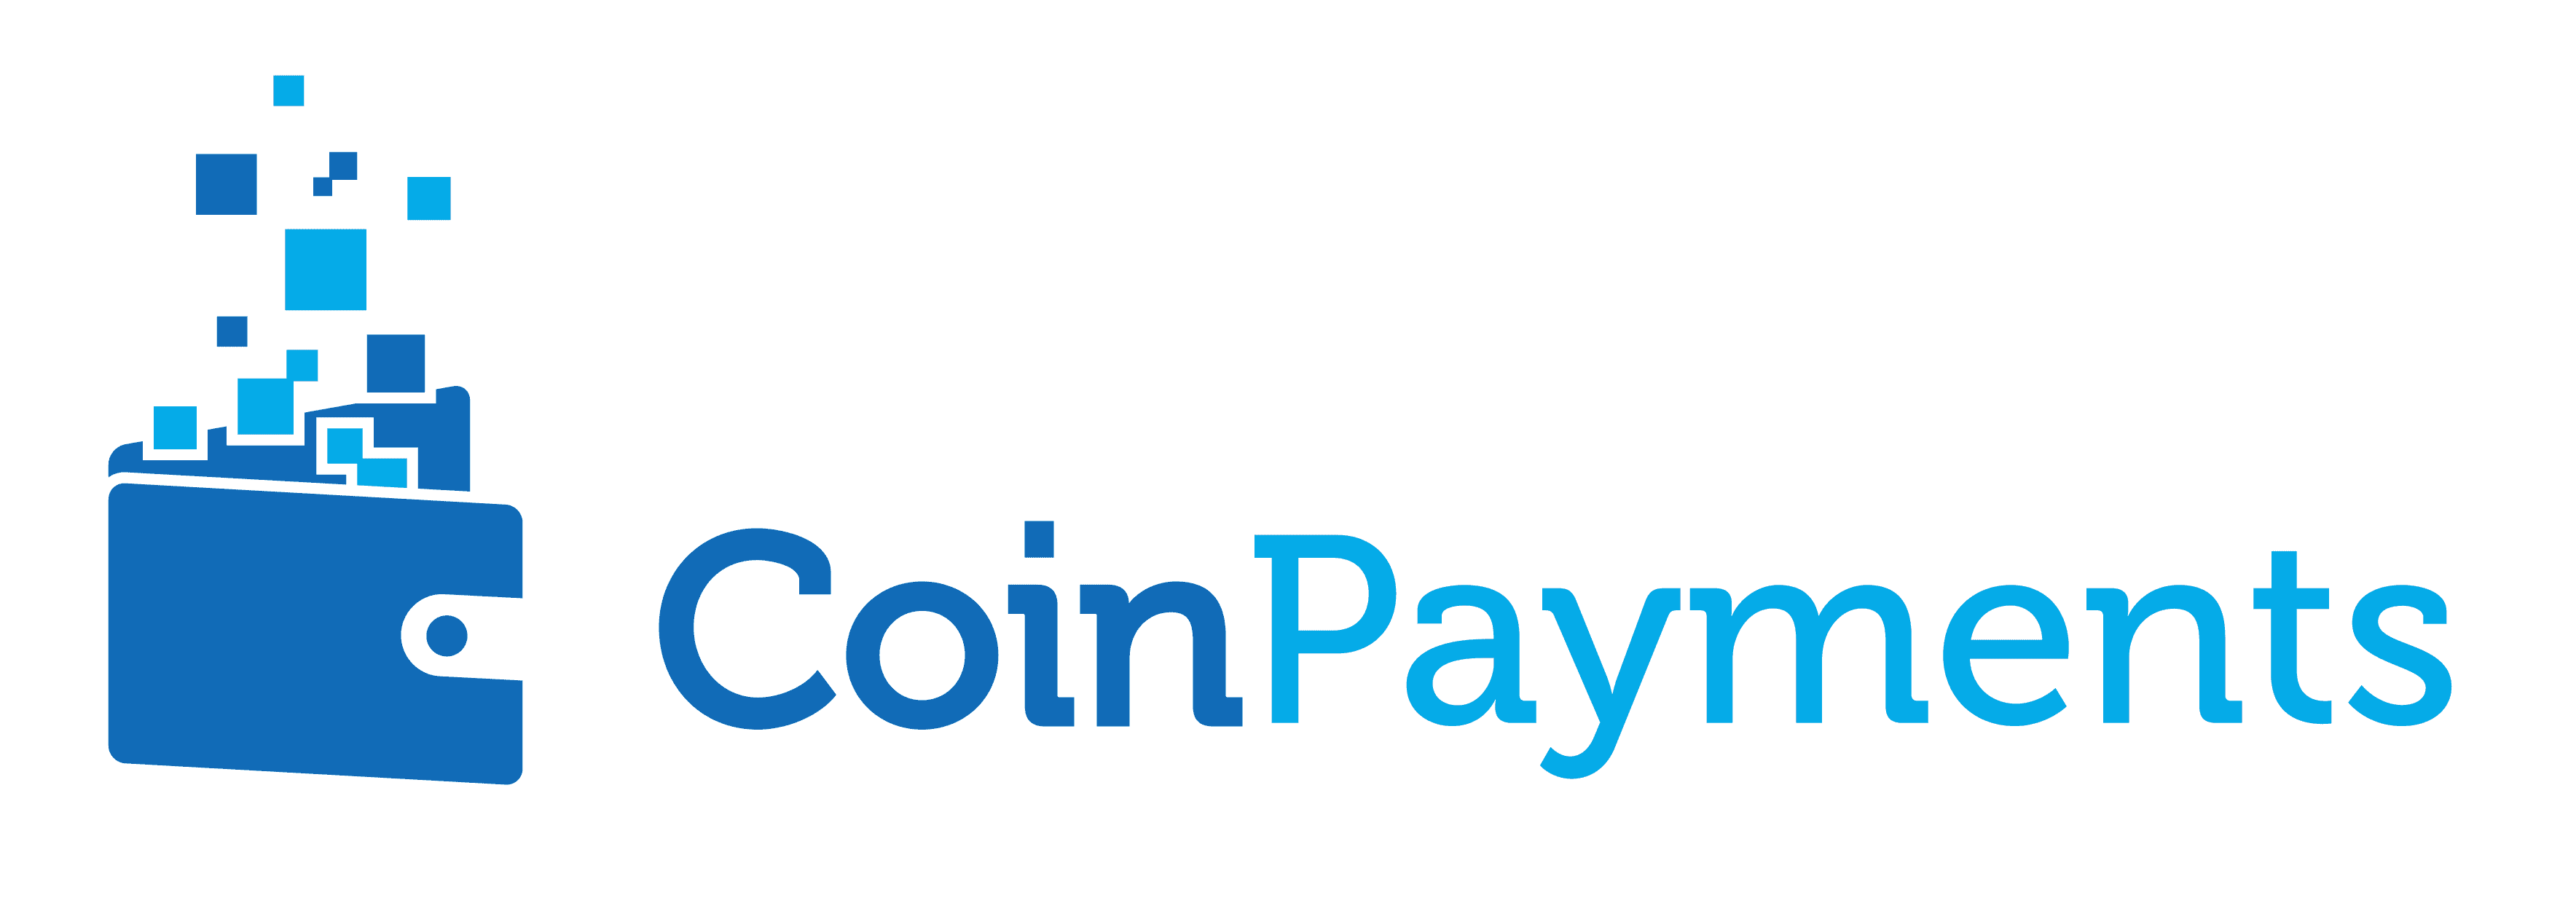 https://www.coinpayments.net/index.php?ref=d52c252bb76353eaee1ecdf02aeacc56